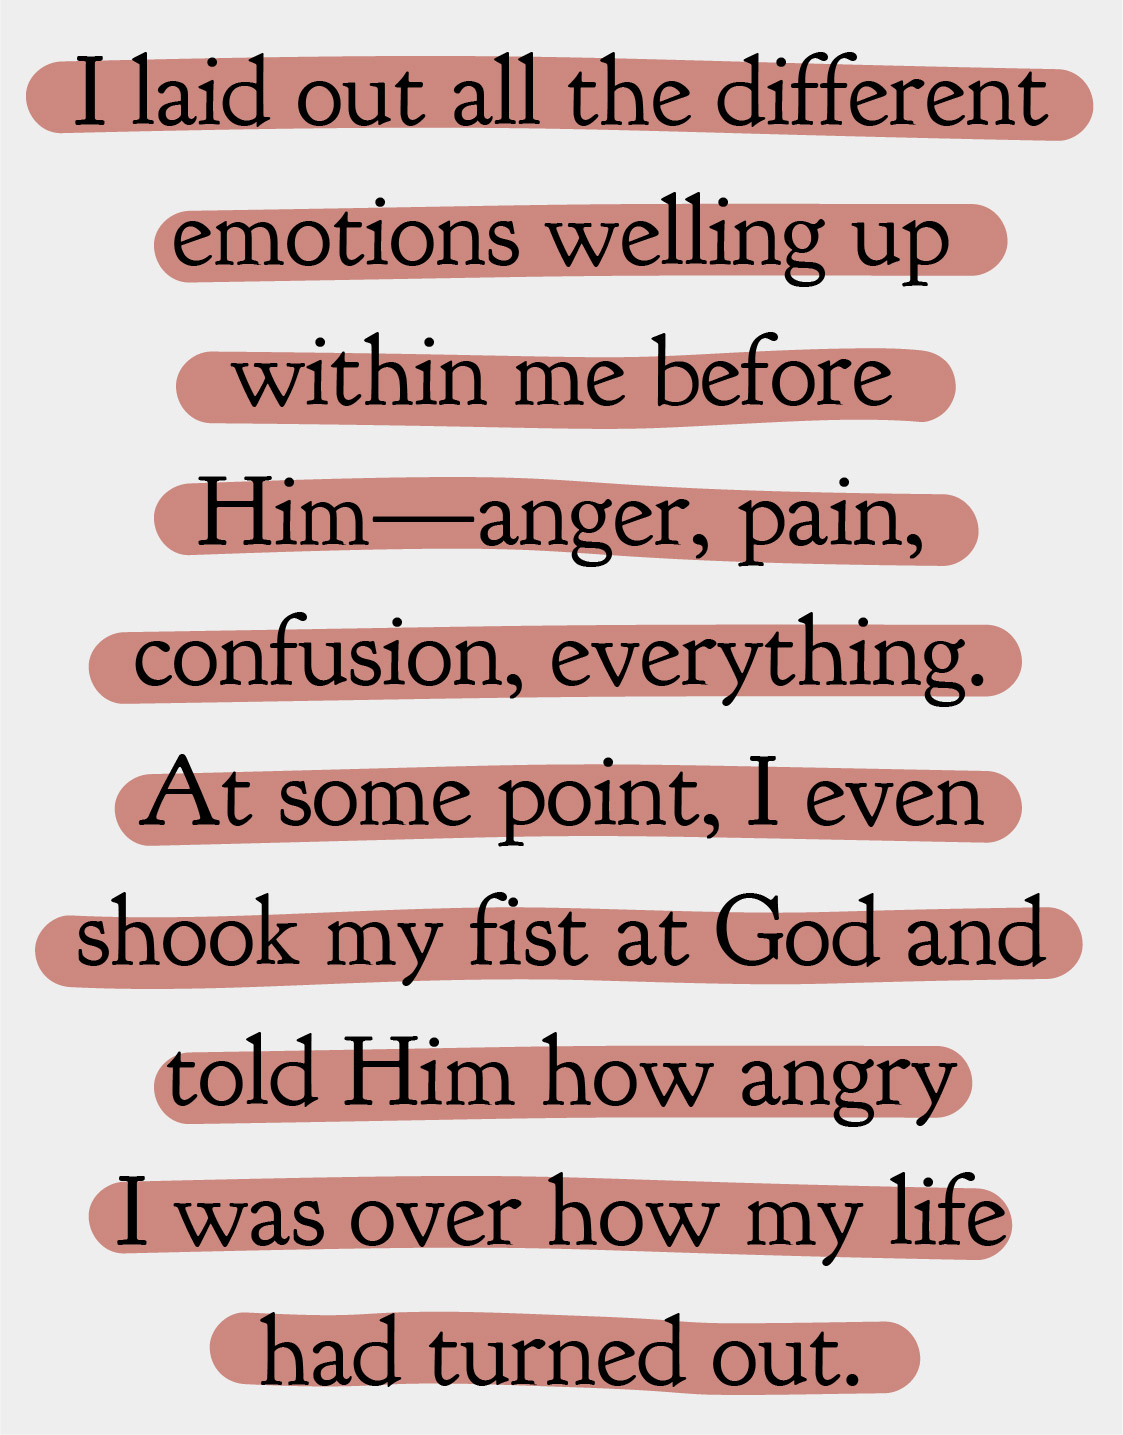 I laid out all the different emotions welling up within me before Him—anger, pain, confusion, everything. At some point, I even shook my fist at God and told Him how angry I was over how my life had turned out.